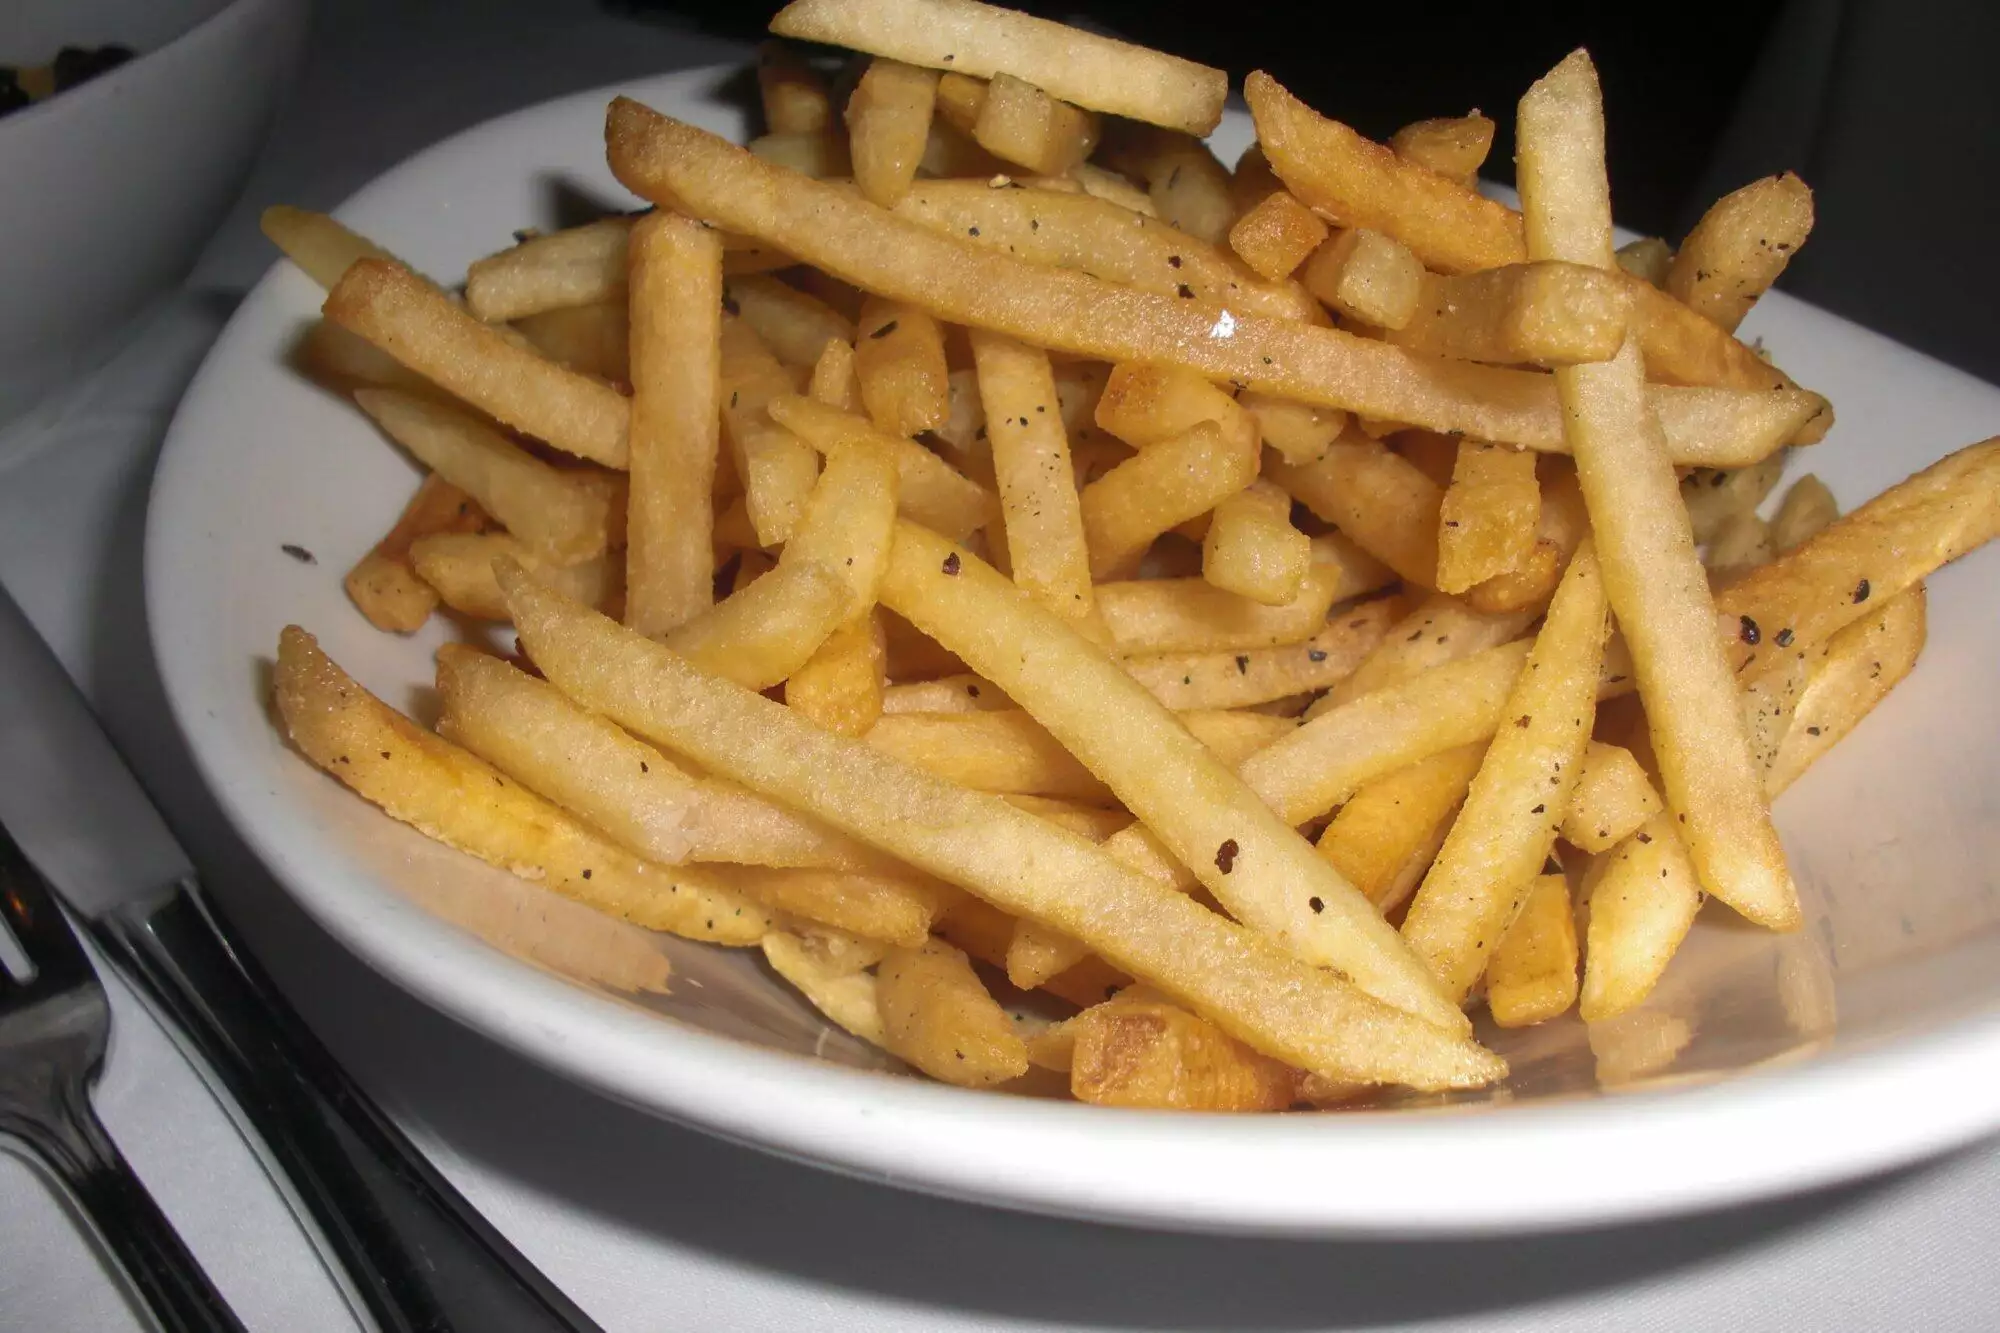 Pacific time restaurant fries